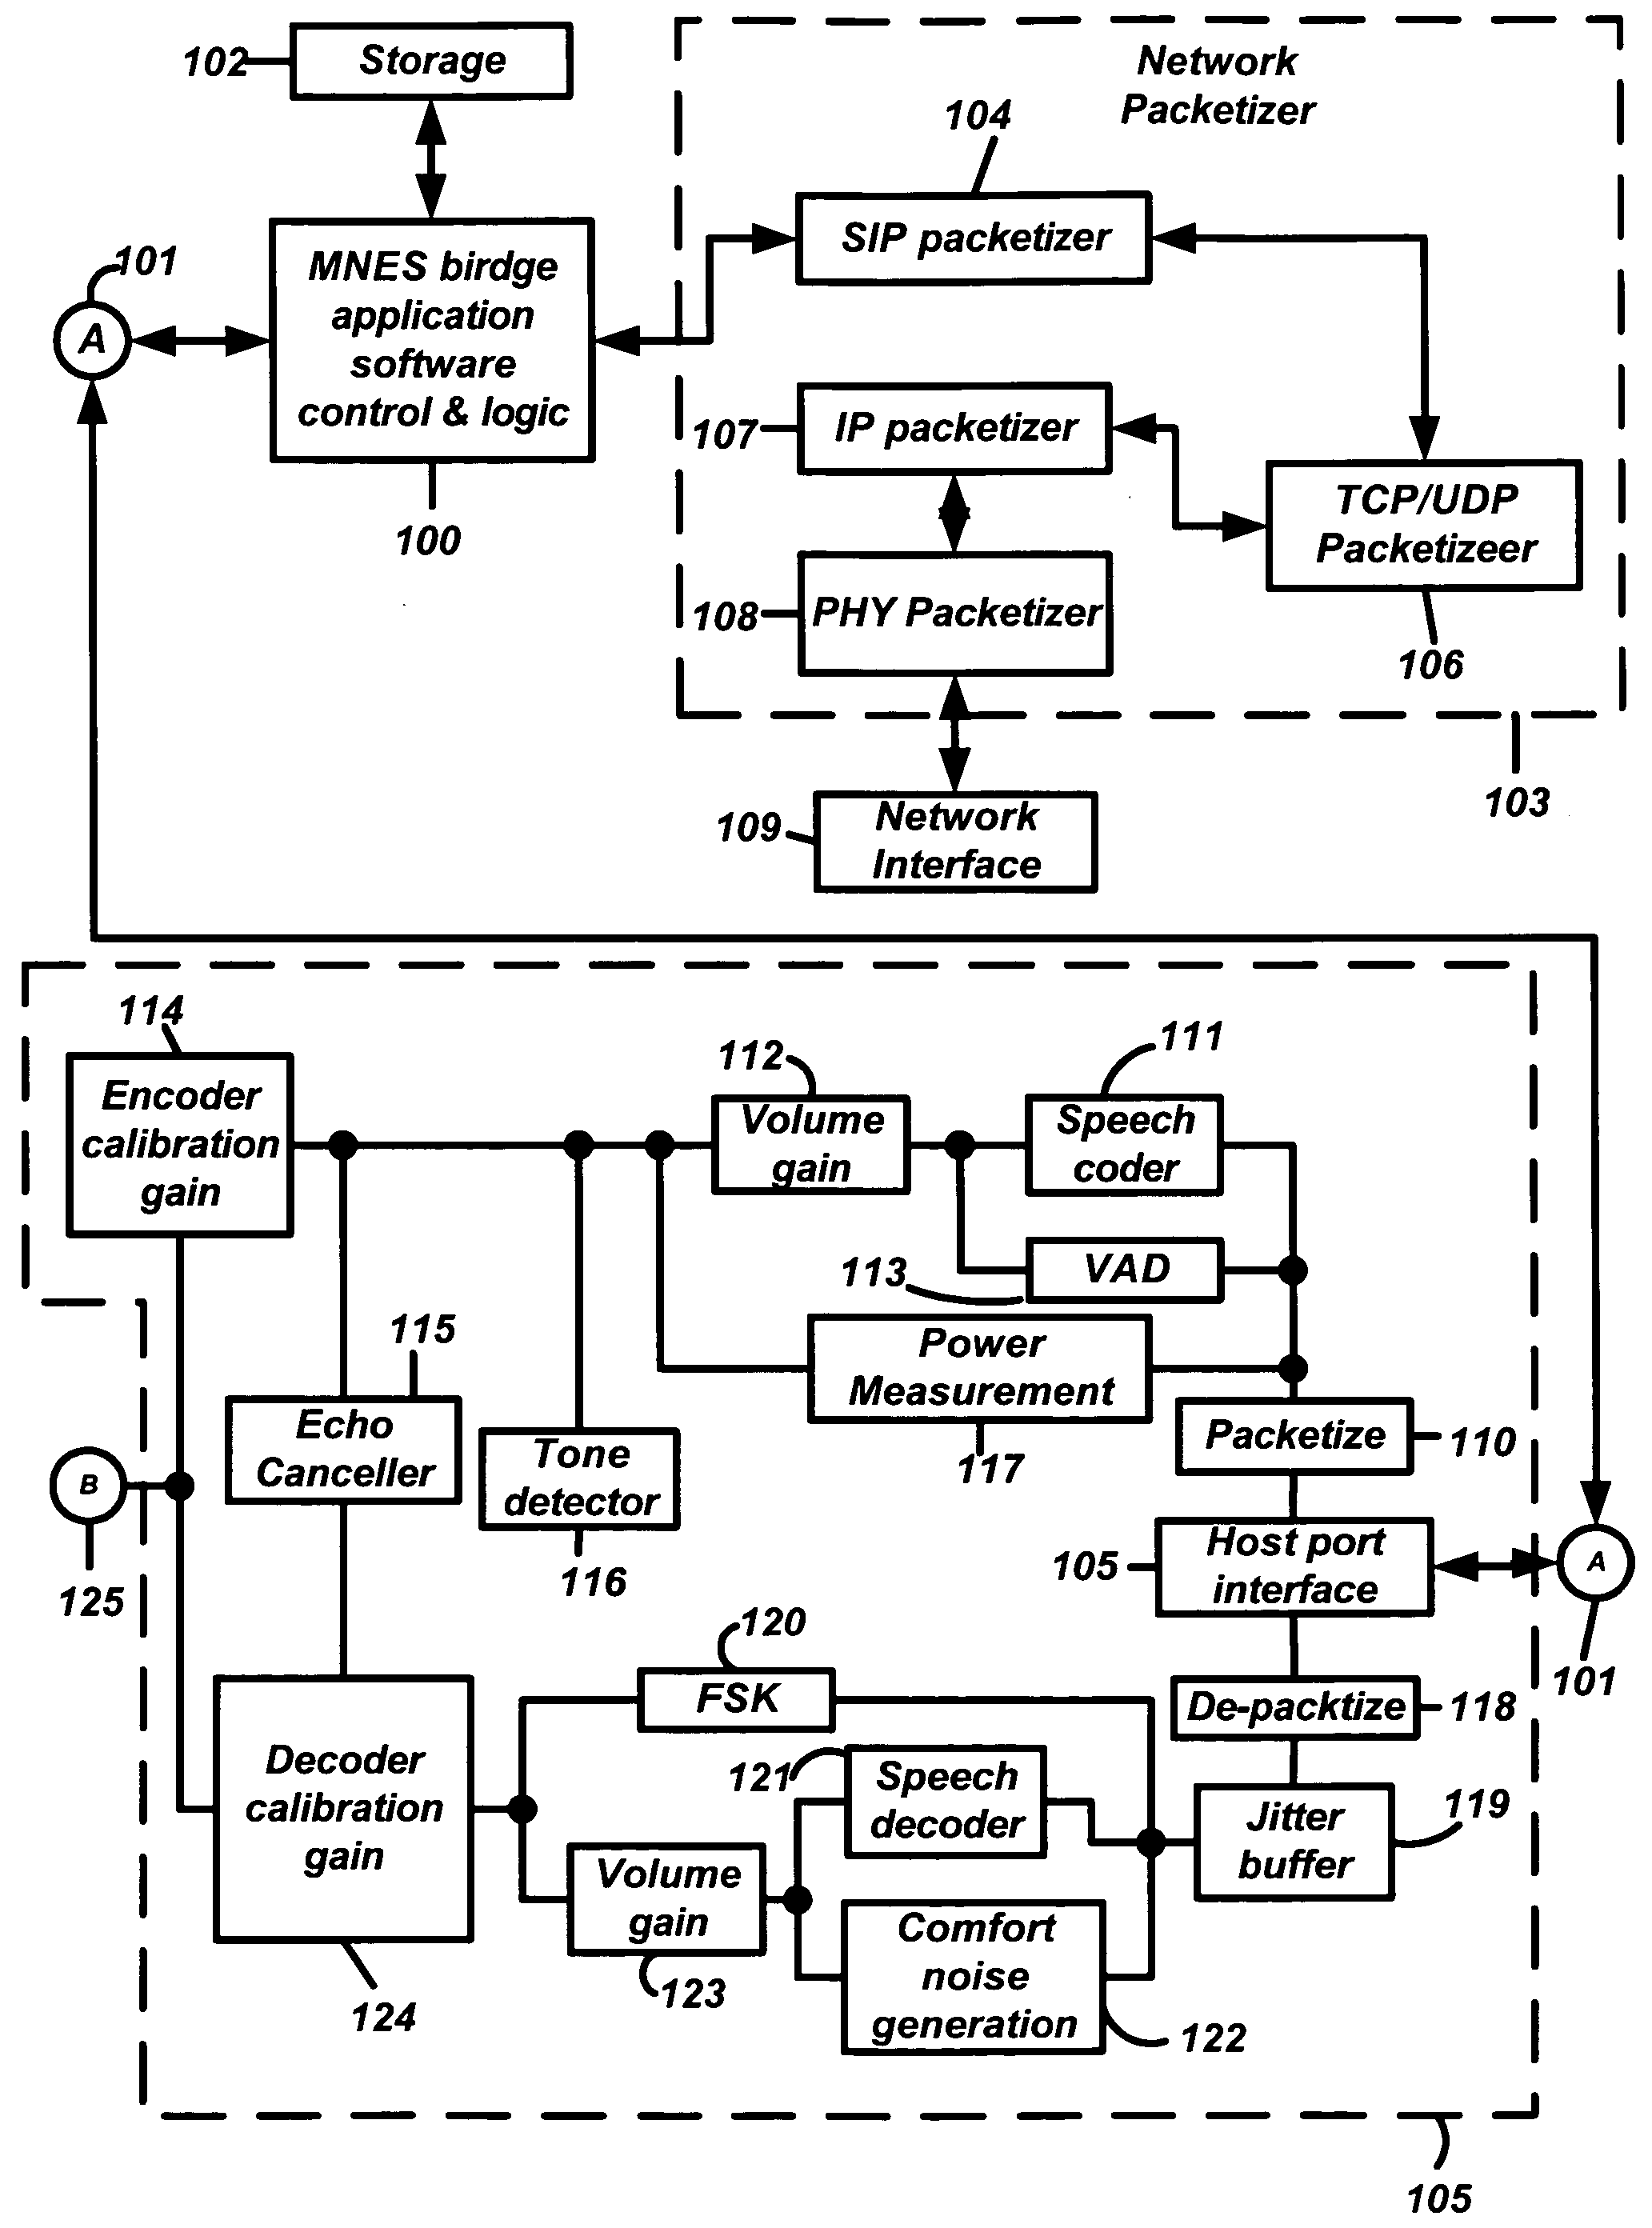 Multi-network exchange system for telephony applications